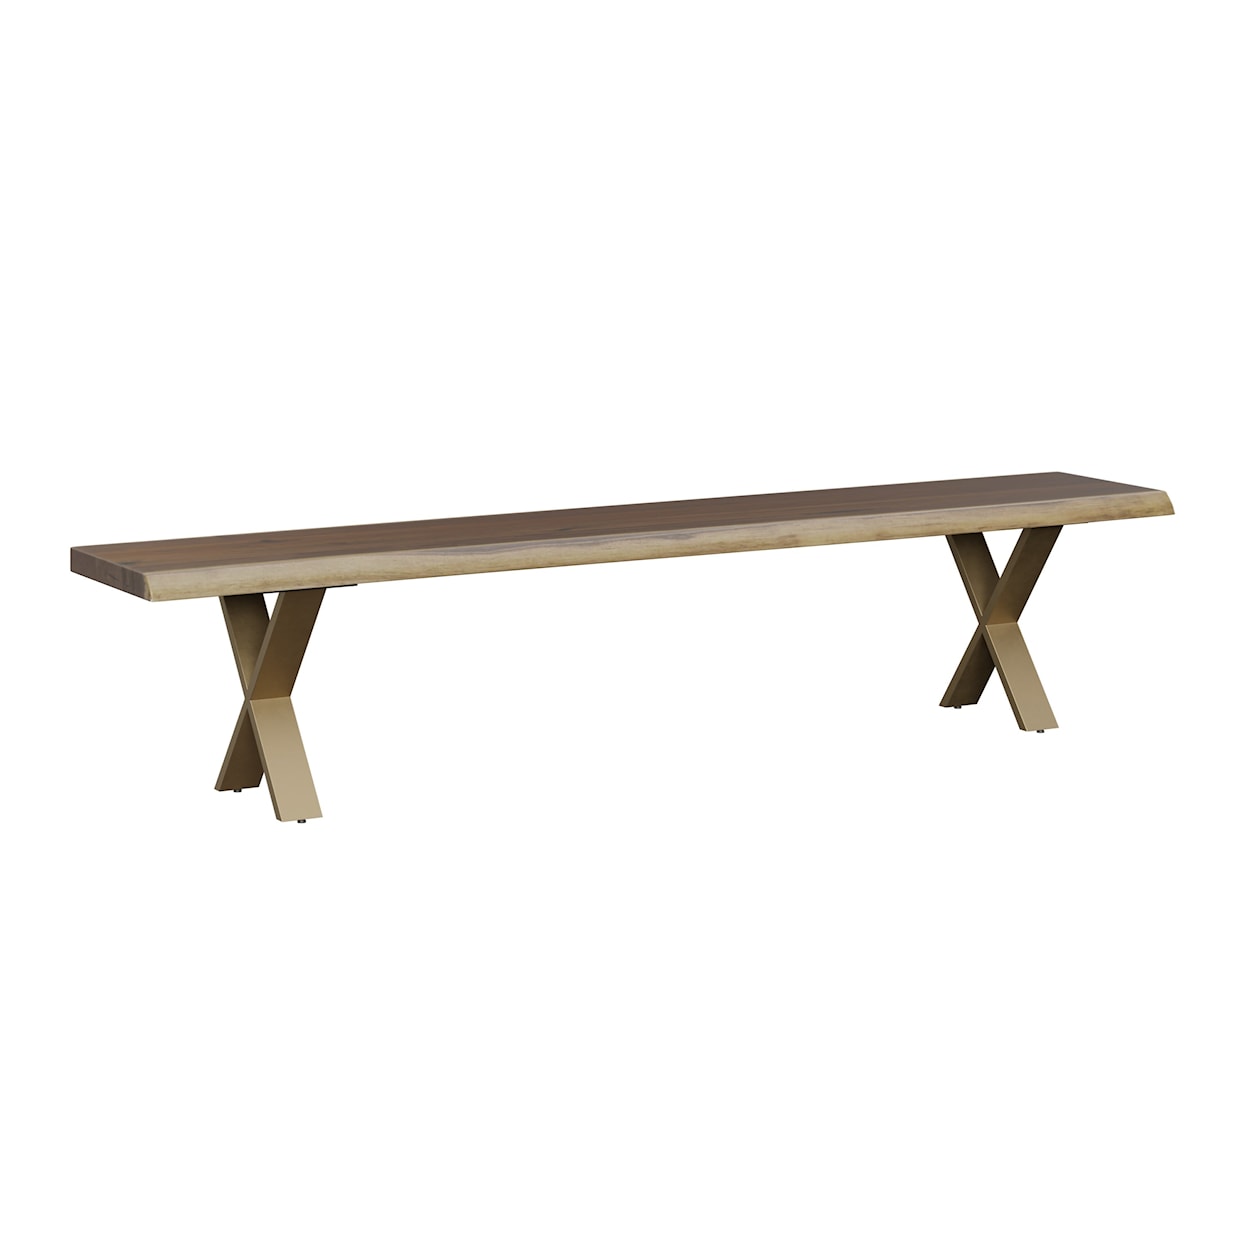 Canal Dover Furniture Bordeaux Live Edge Dining Bench - X Base